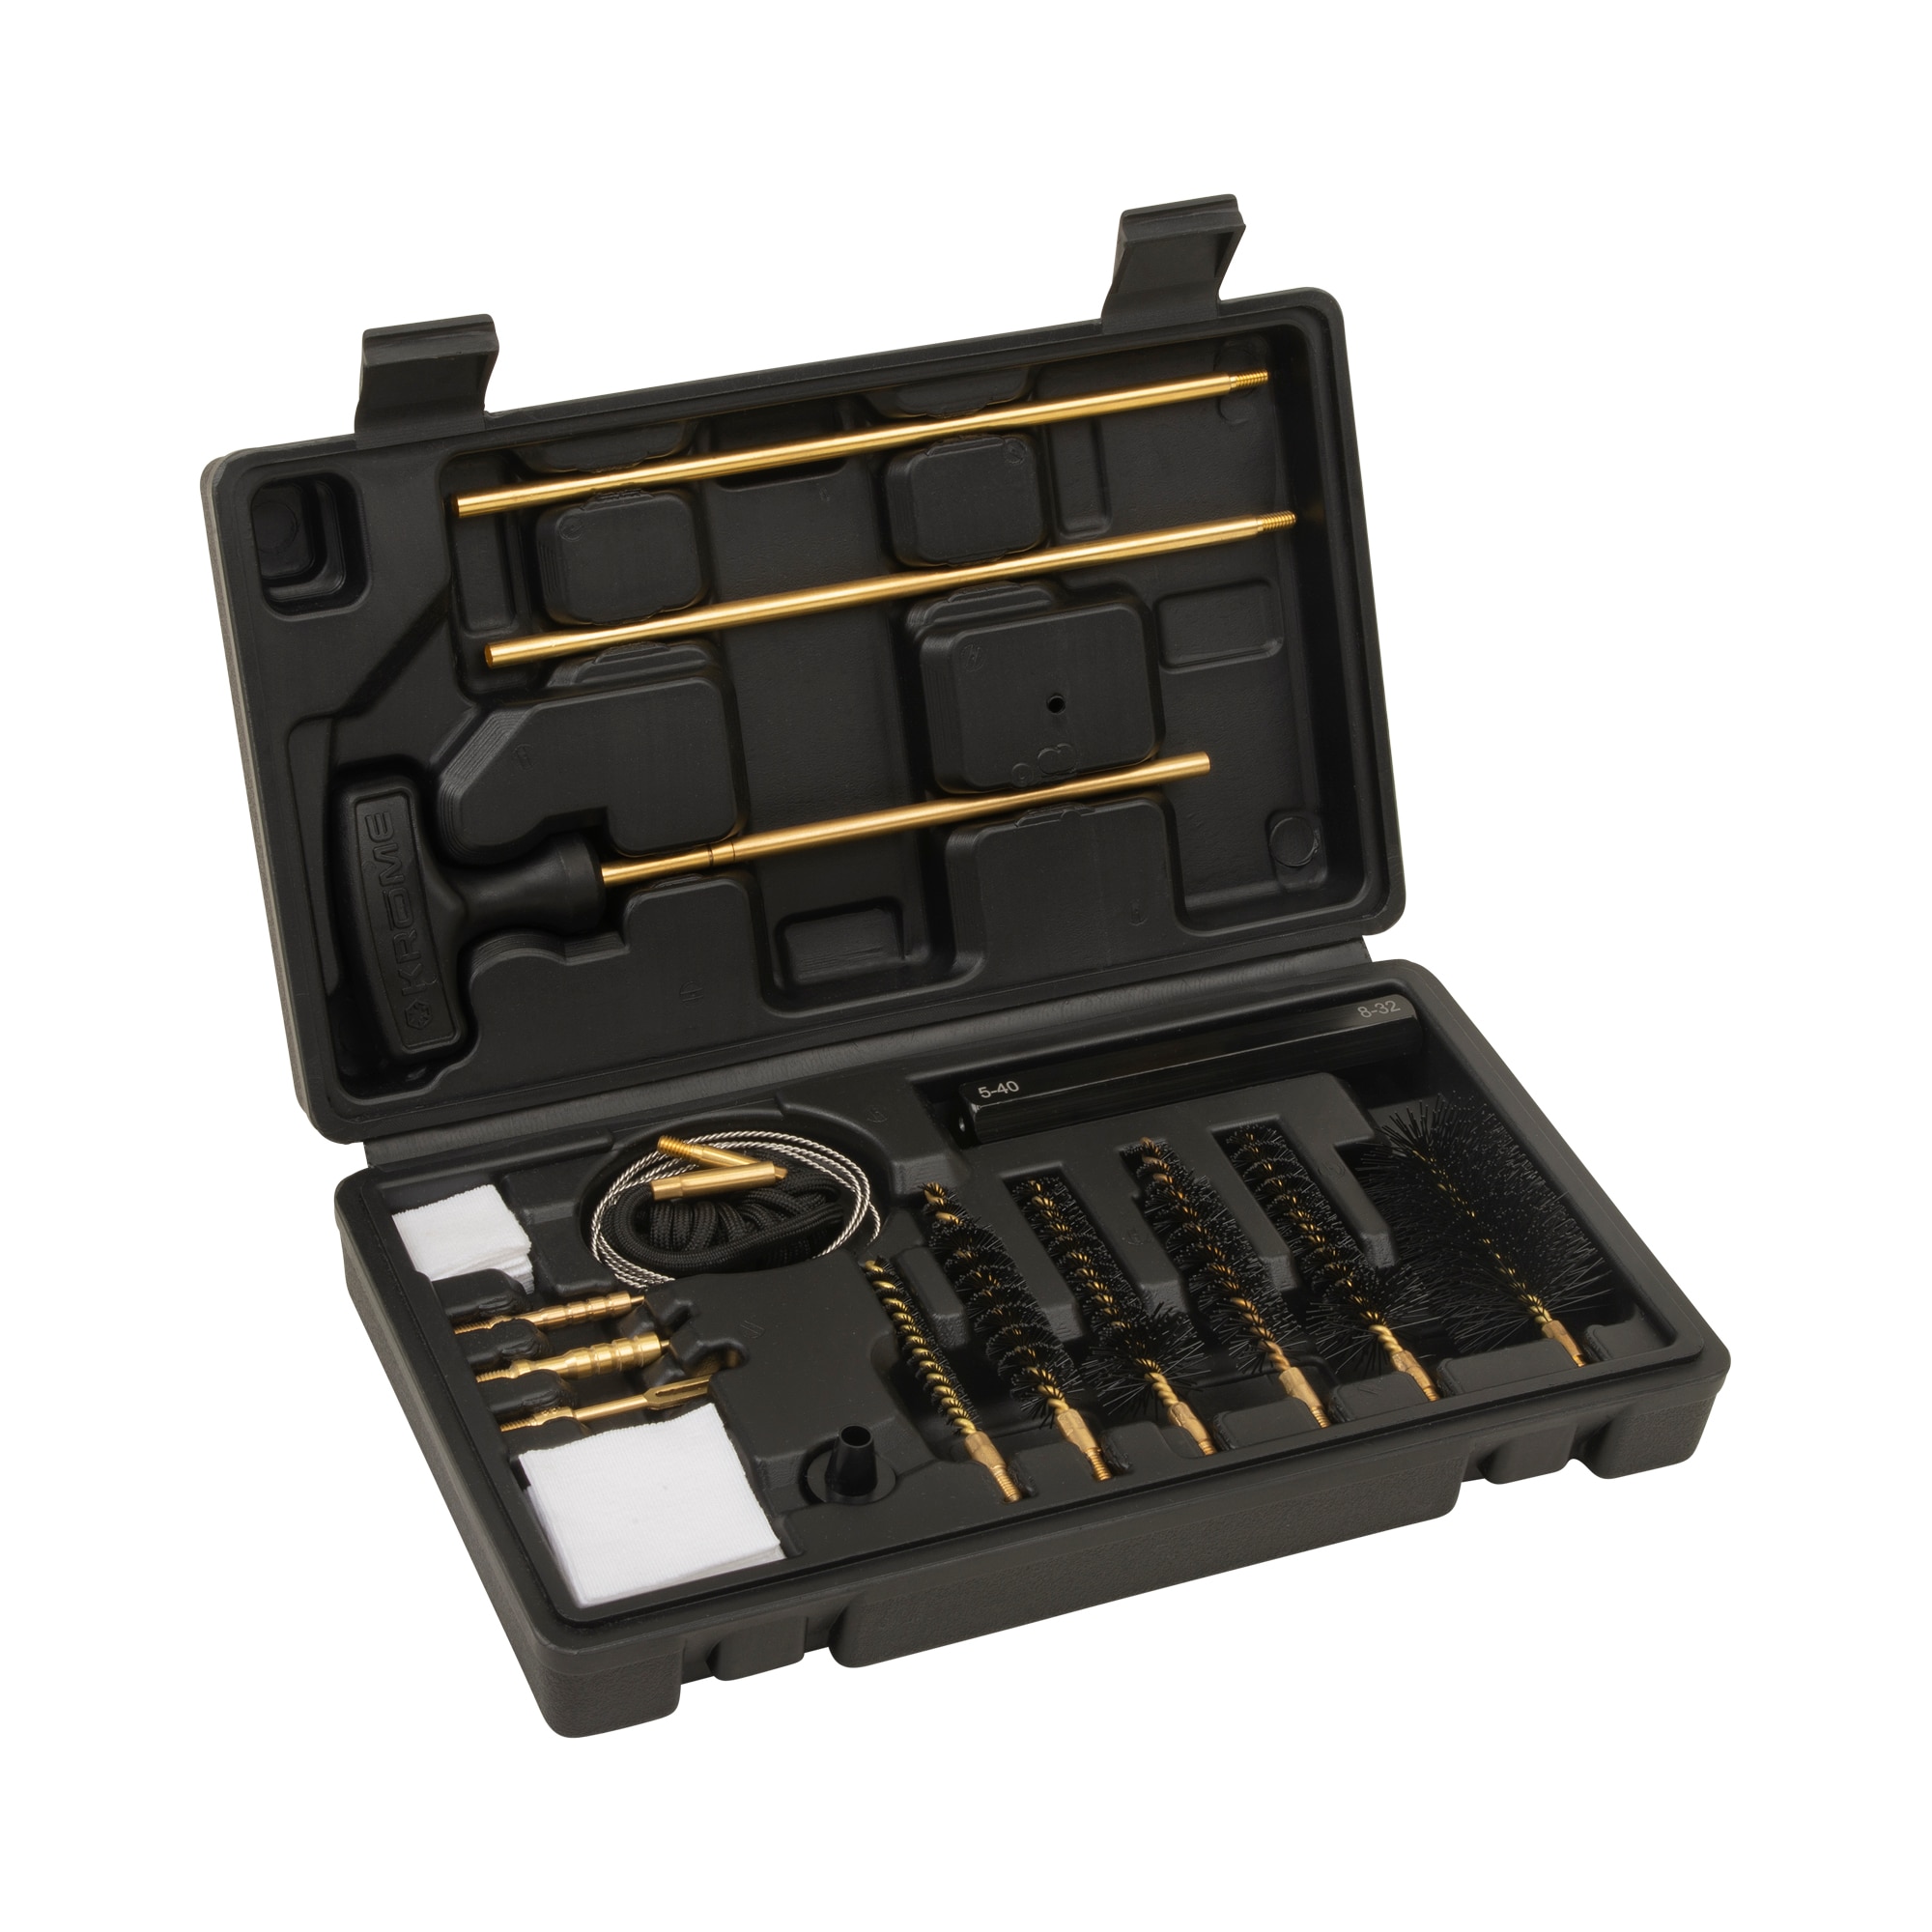 Krome Rifle Cleaning Kit - 17-Piece Gun Cleaning Accessories for